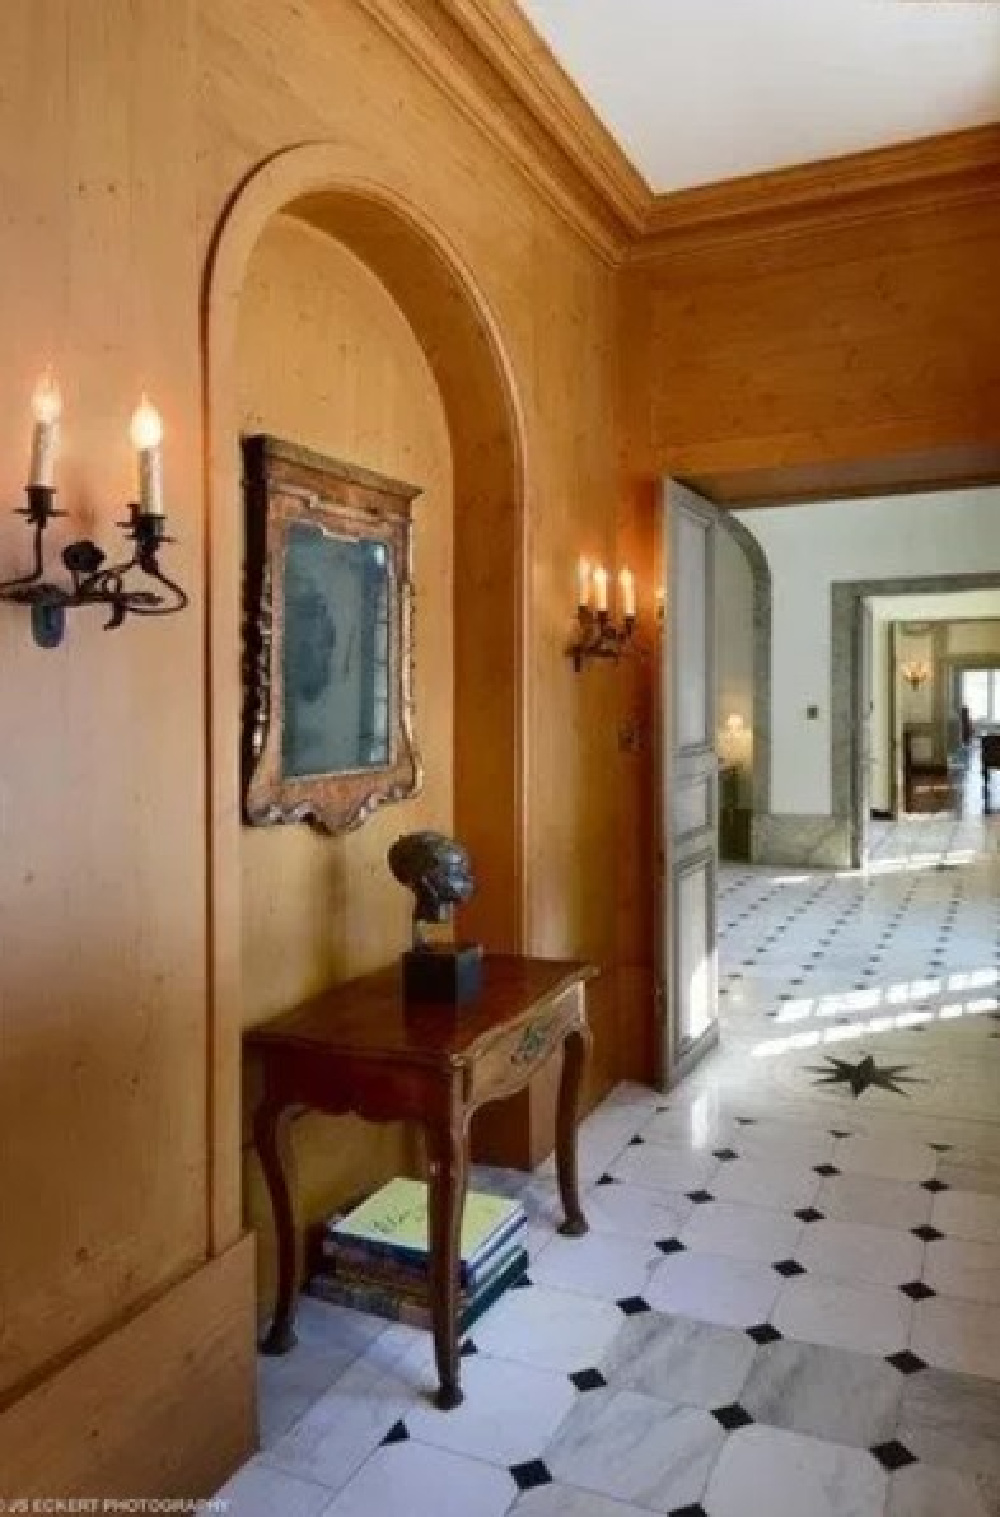 David Adler La Lanterne Mansion is a 1922 historic home in Lake Bluff with French inspired architecture and interiors.